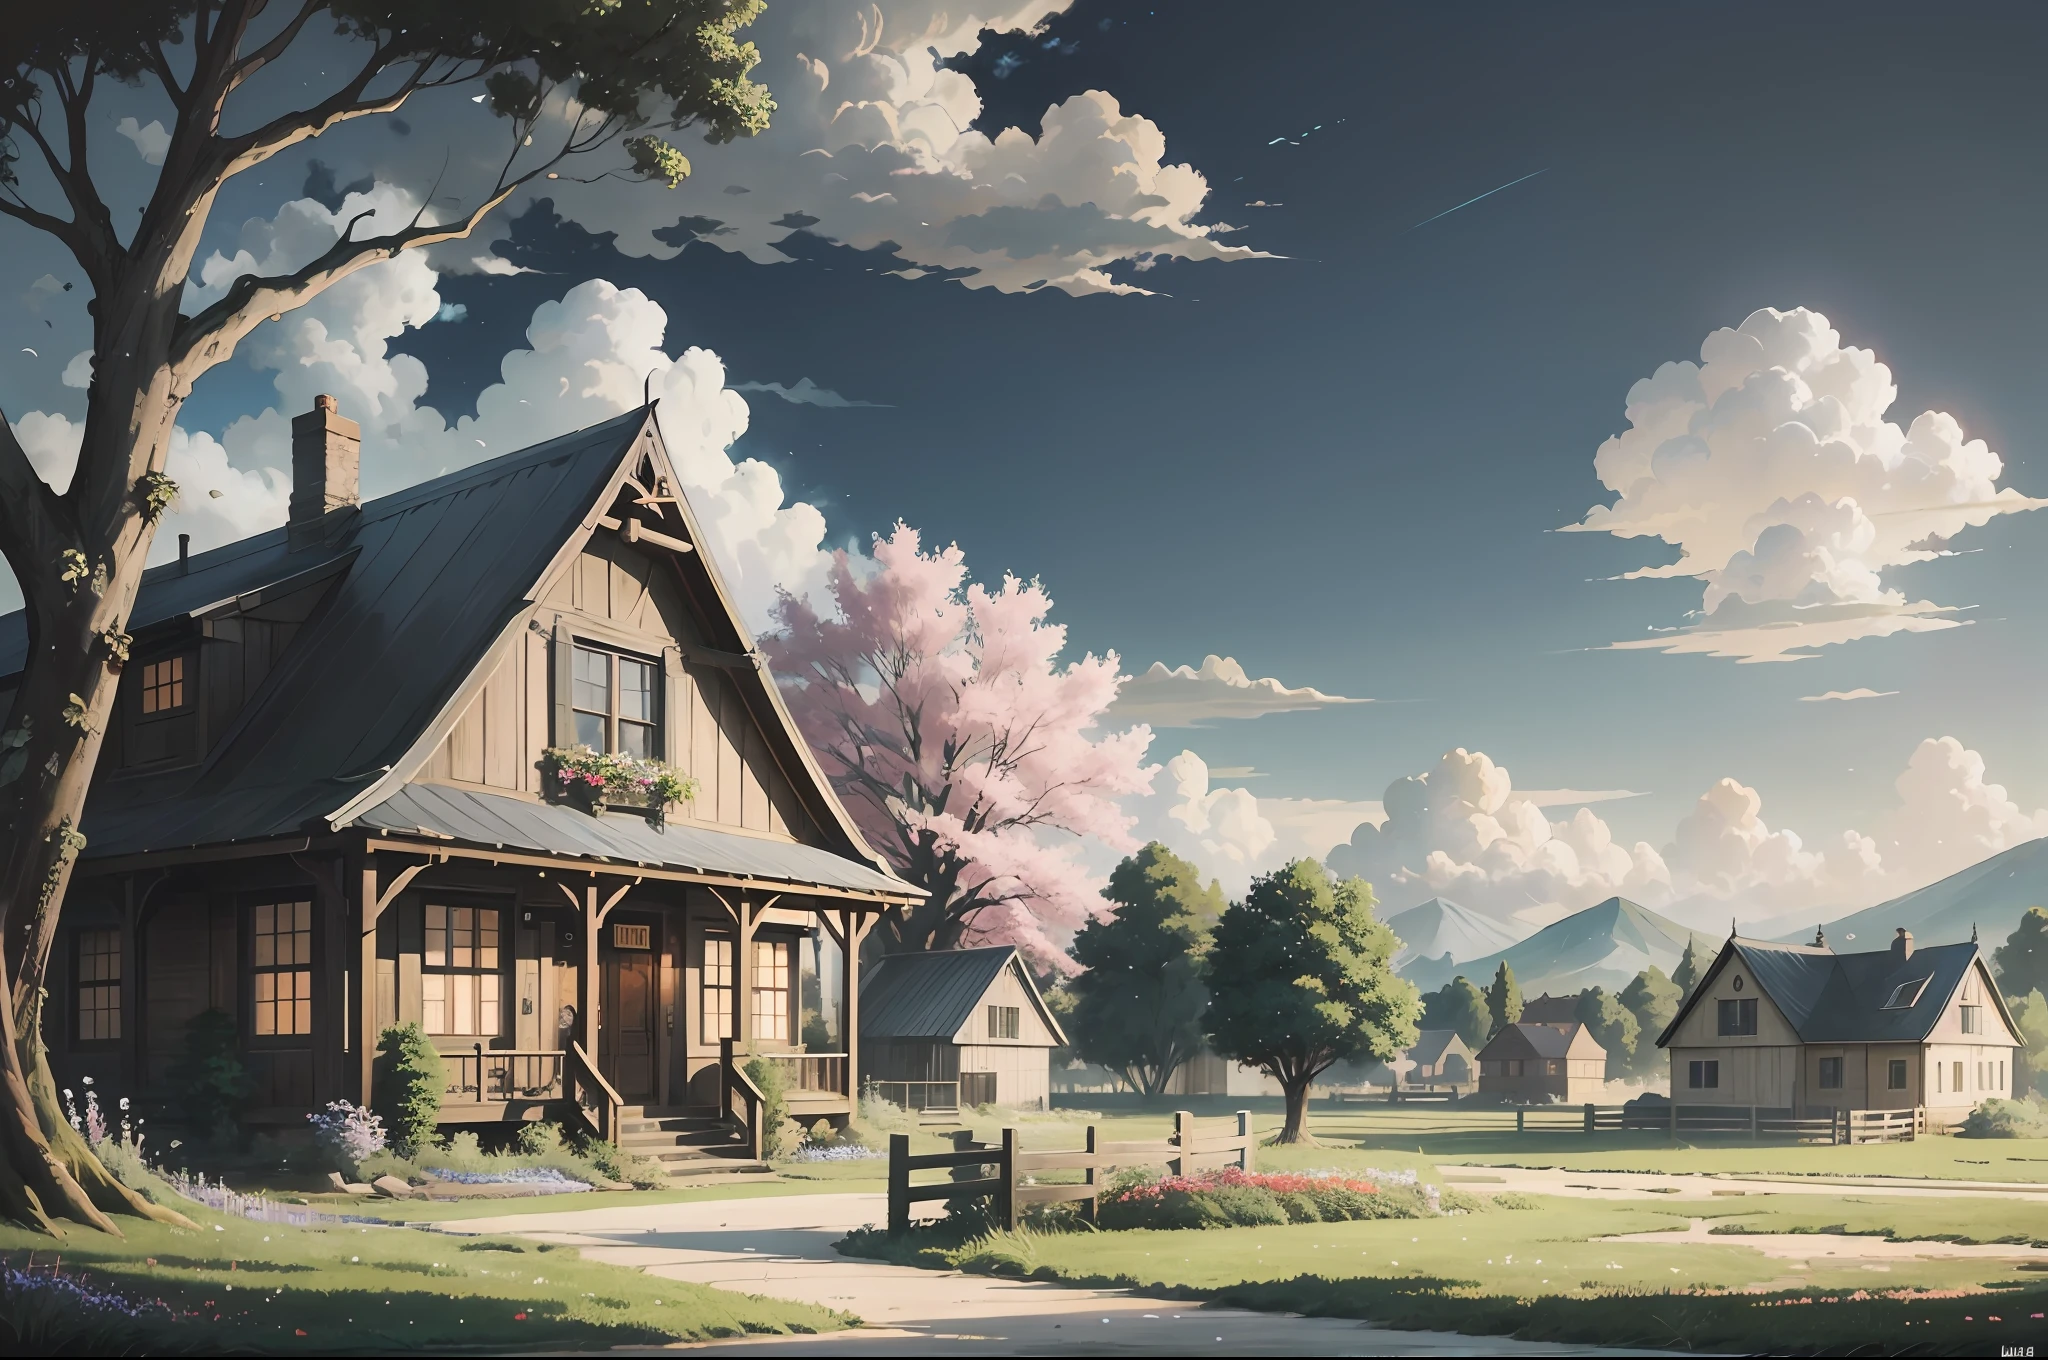 Anime Artistic Image Studio Ghibli-style Cottage AI-generated image  2354382985 | Shutterstock